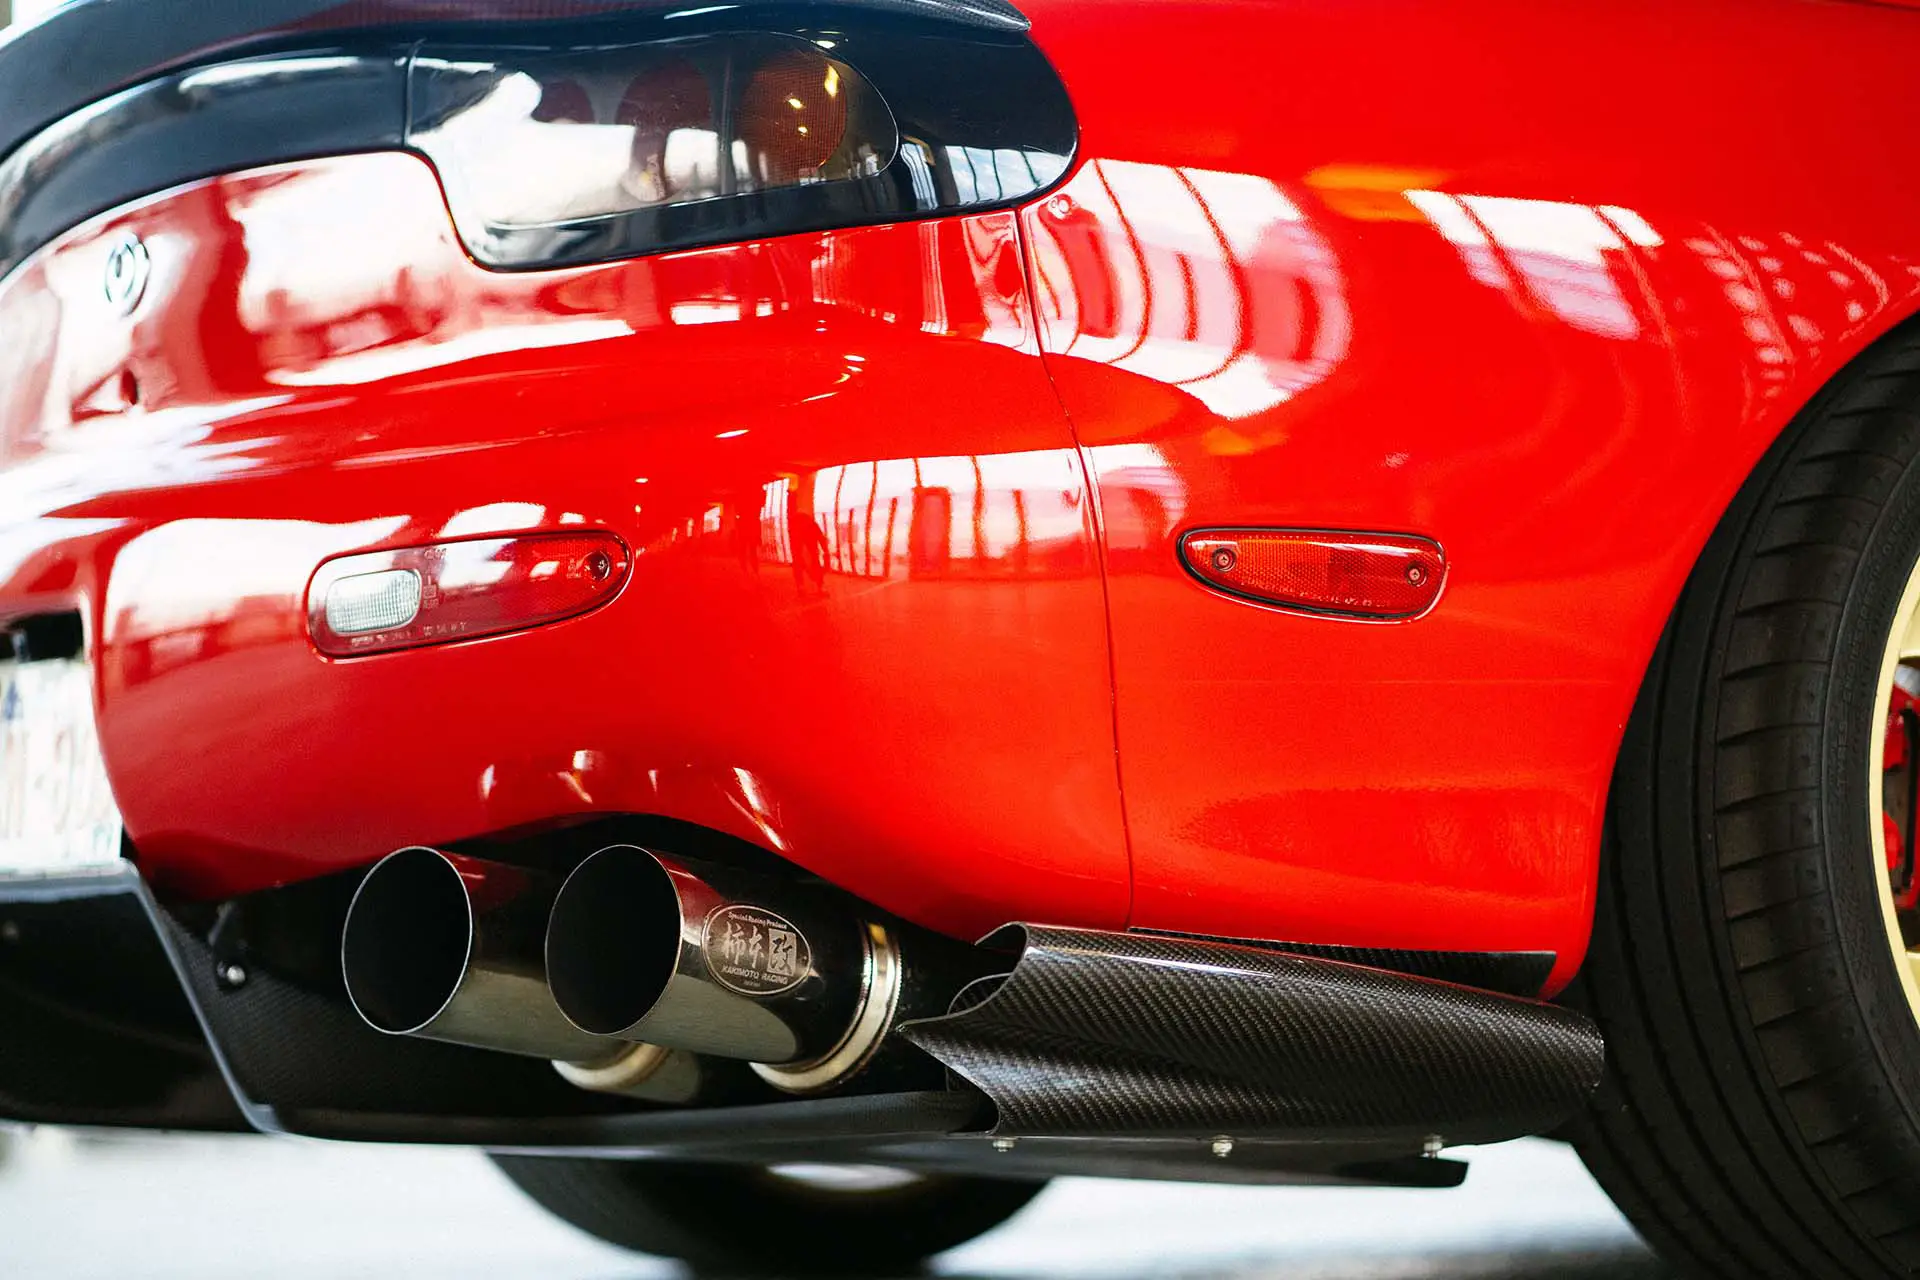 A close-up of the tailpipe on a red car